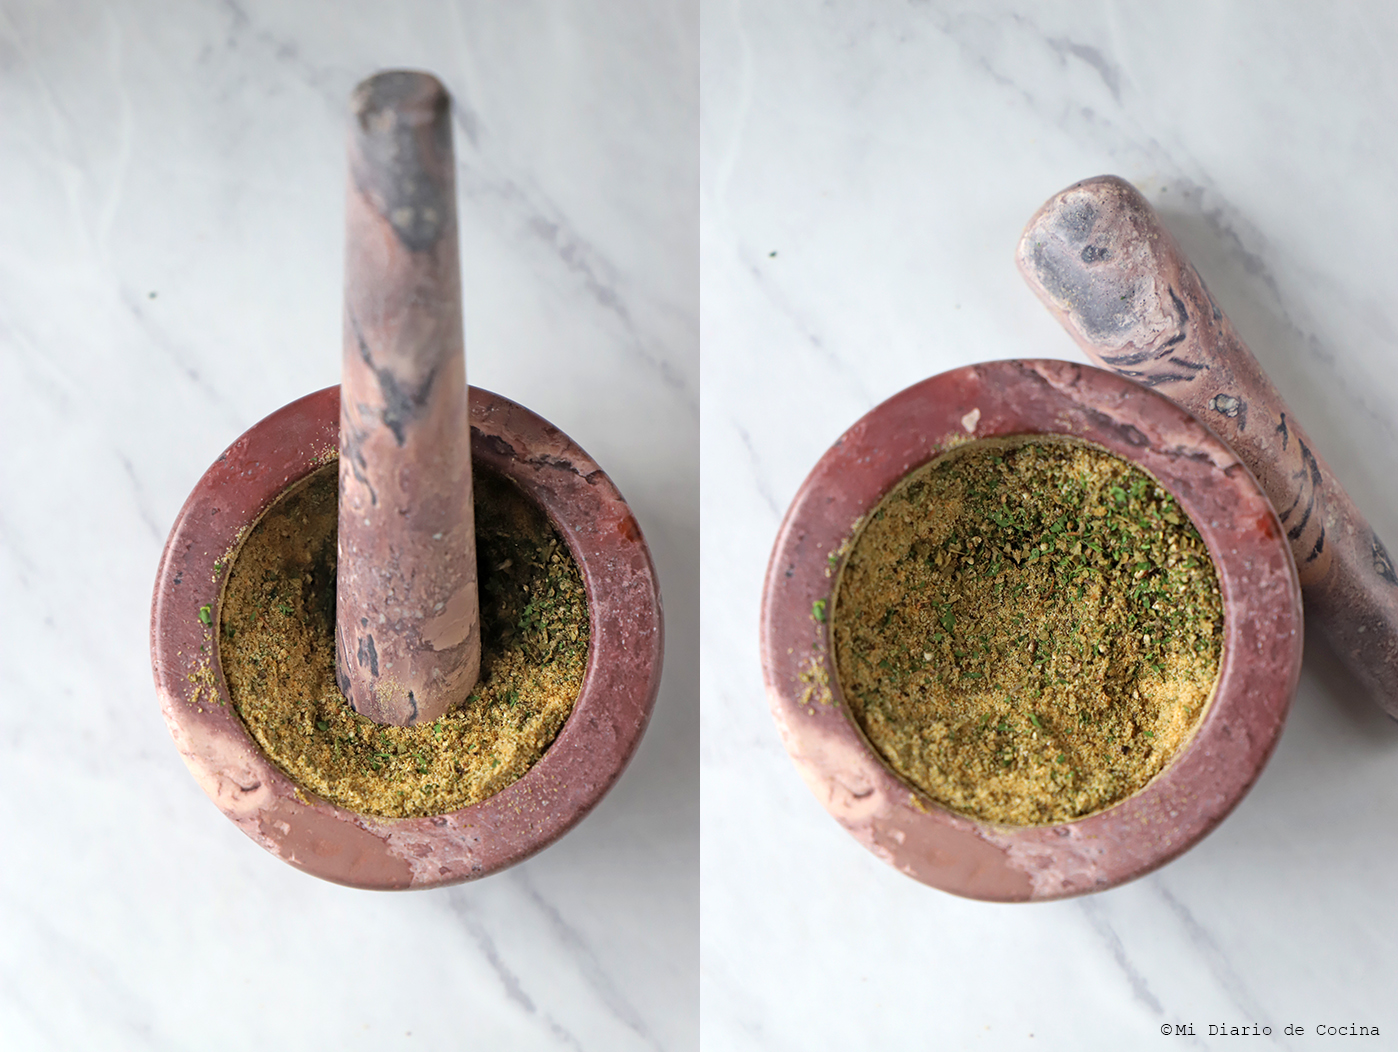 Chilean Spice Blend - Mortar with ingredients